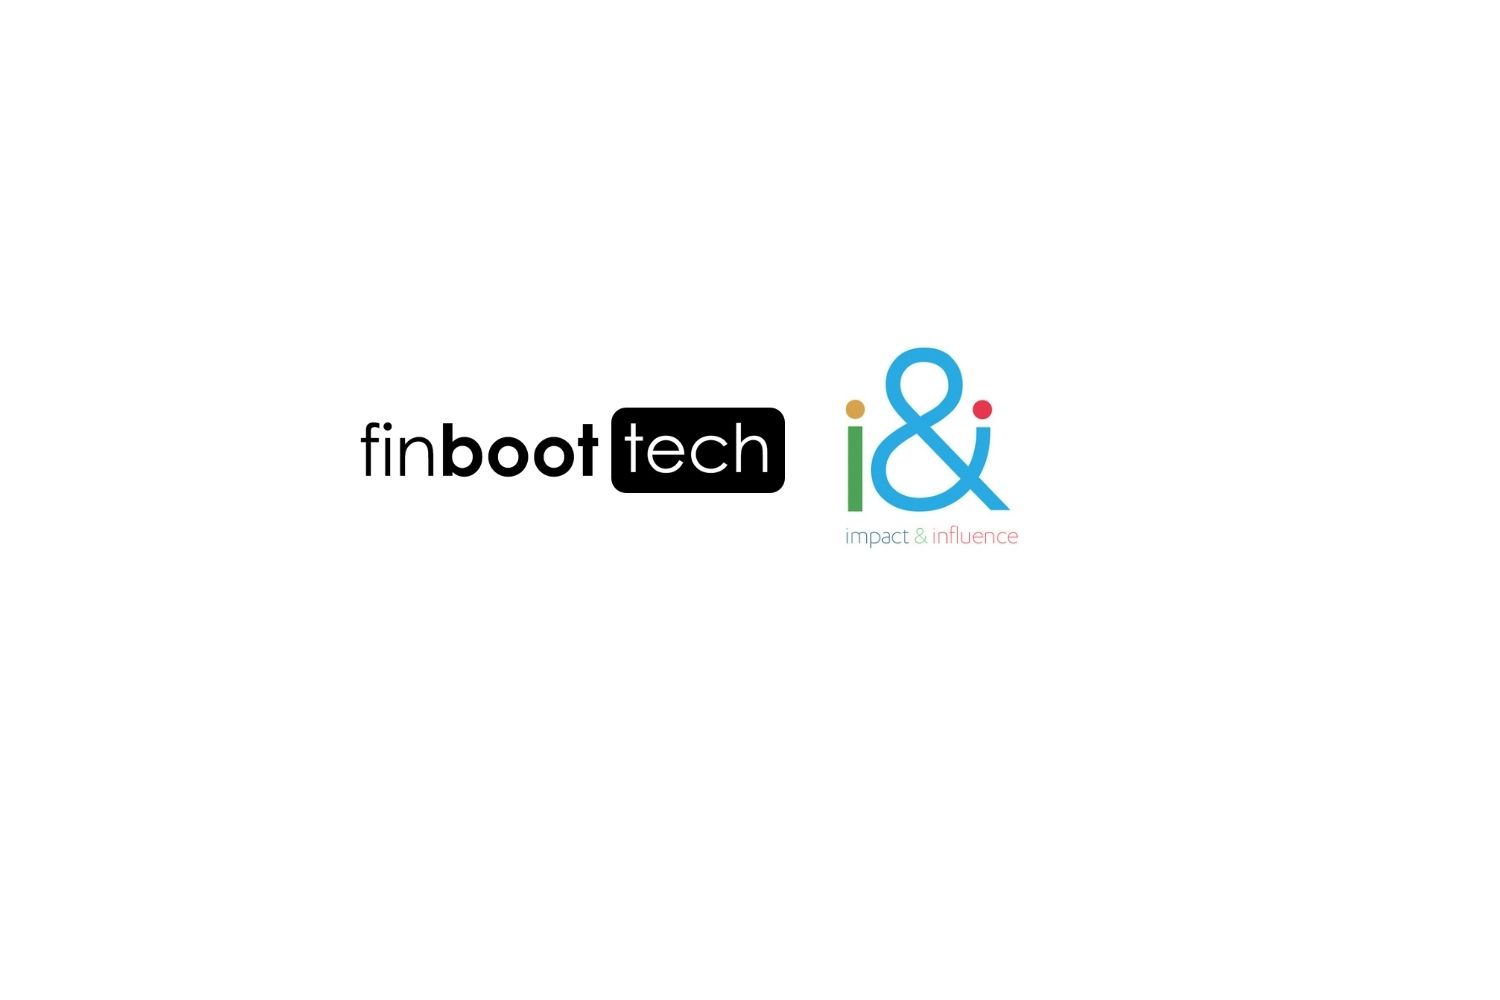 Tech company Finboot appoints I&I for communications and content brief